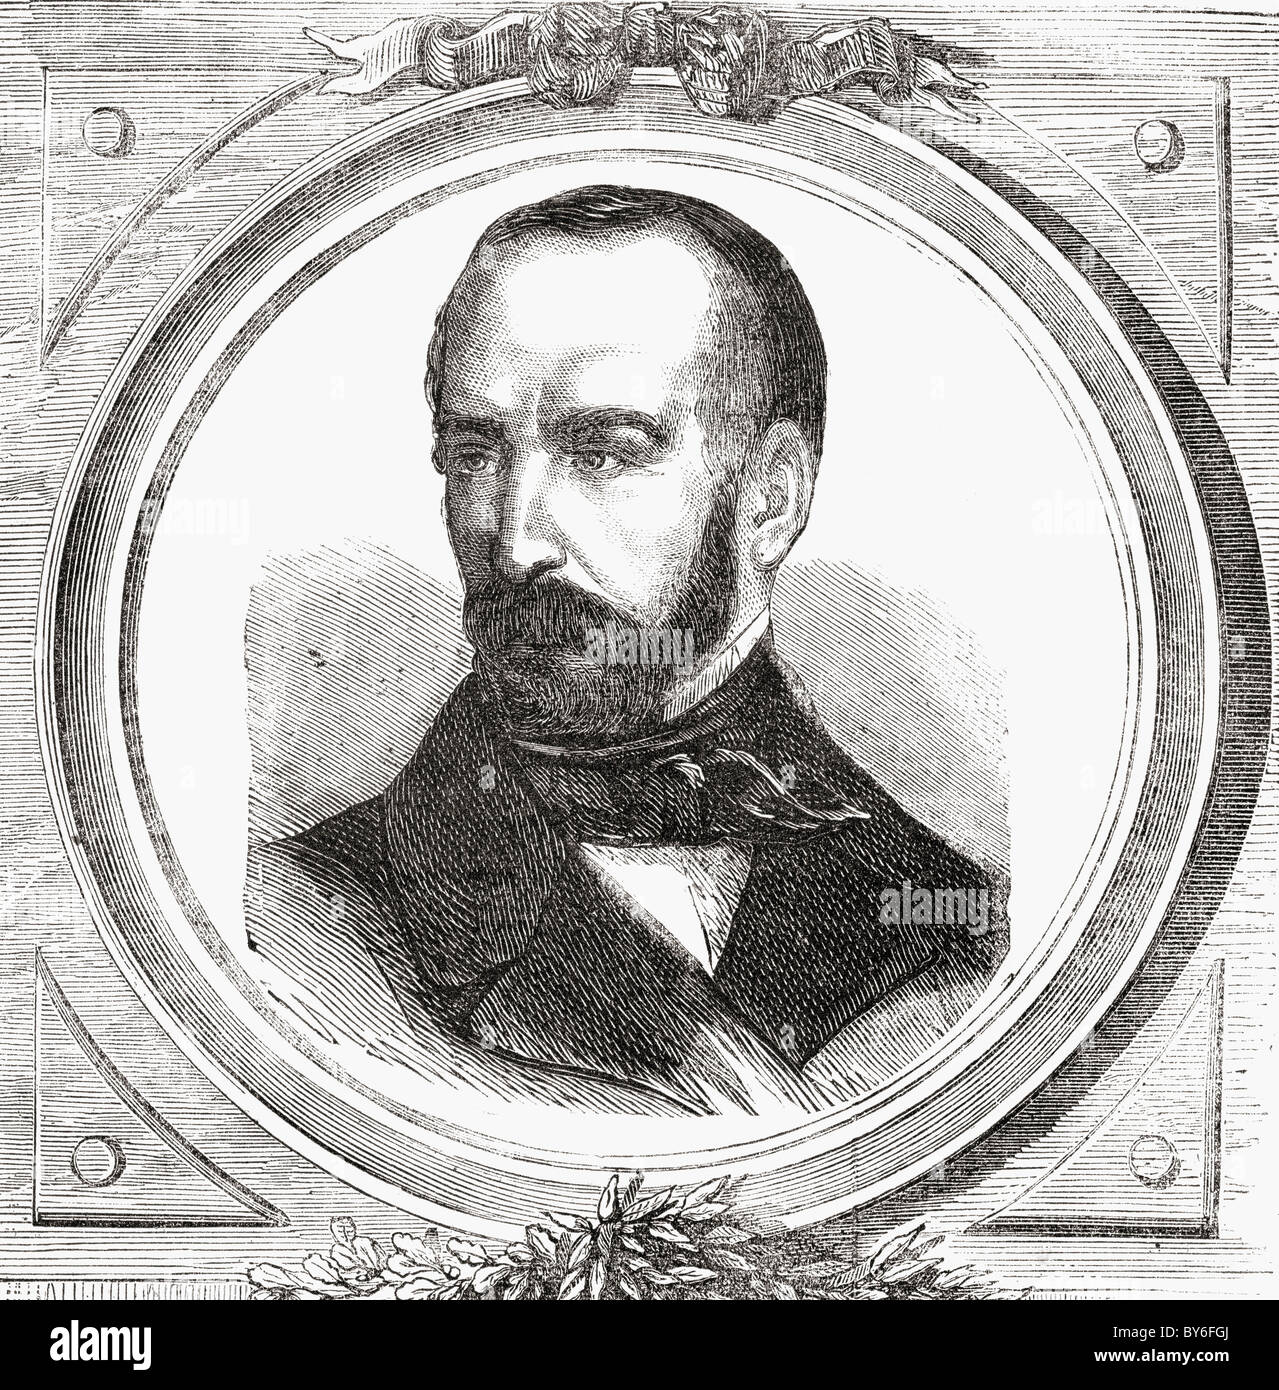 Armand Barbès, 1809 to 1870. French Republican revolutionary. Stock Photo